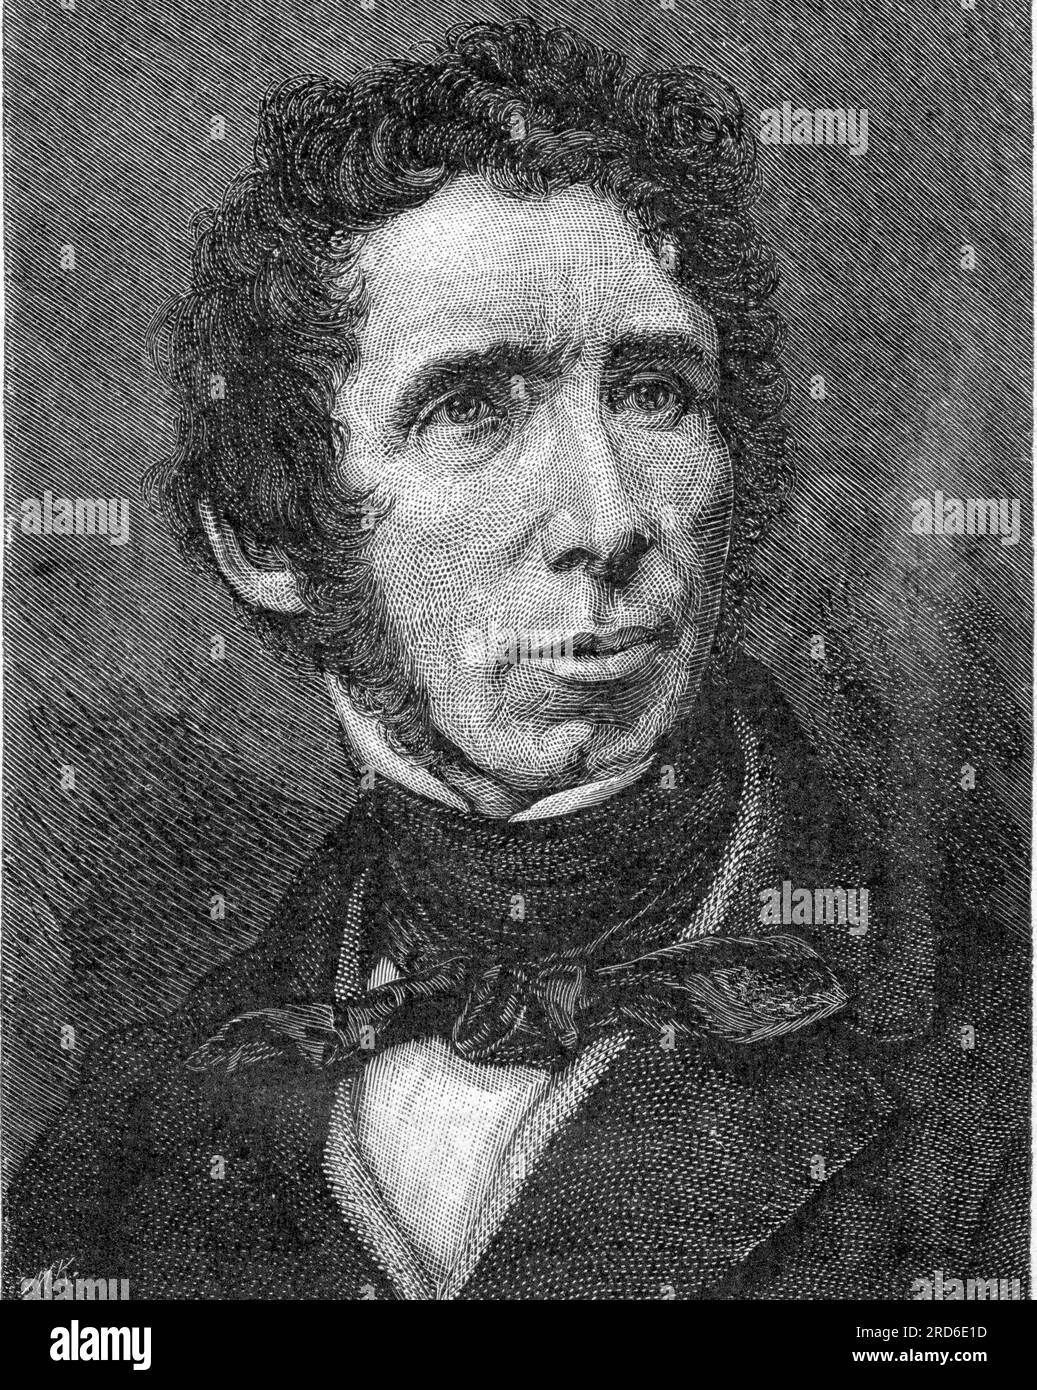 Woehler, Friedrich, 31.7.1800 - 23.9.1882, German chemist, wood engraving by Moritz Klinkicht, ARTIST'S COPYRIGHT HAS NOT TO BE CLEARED Stock Photo